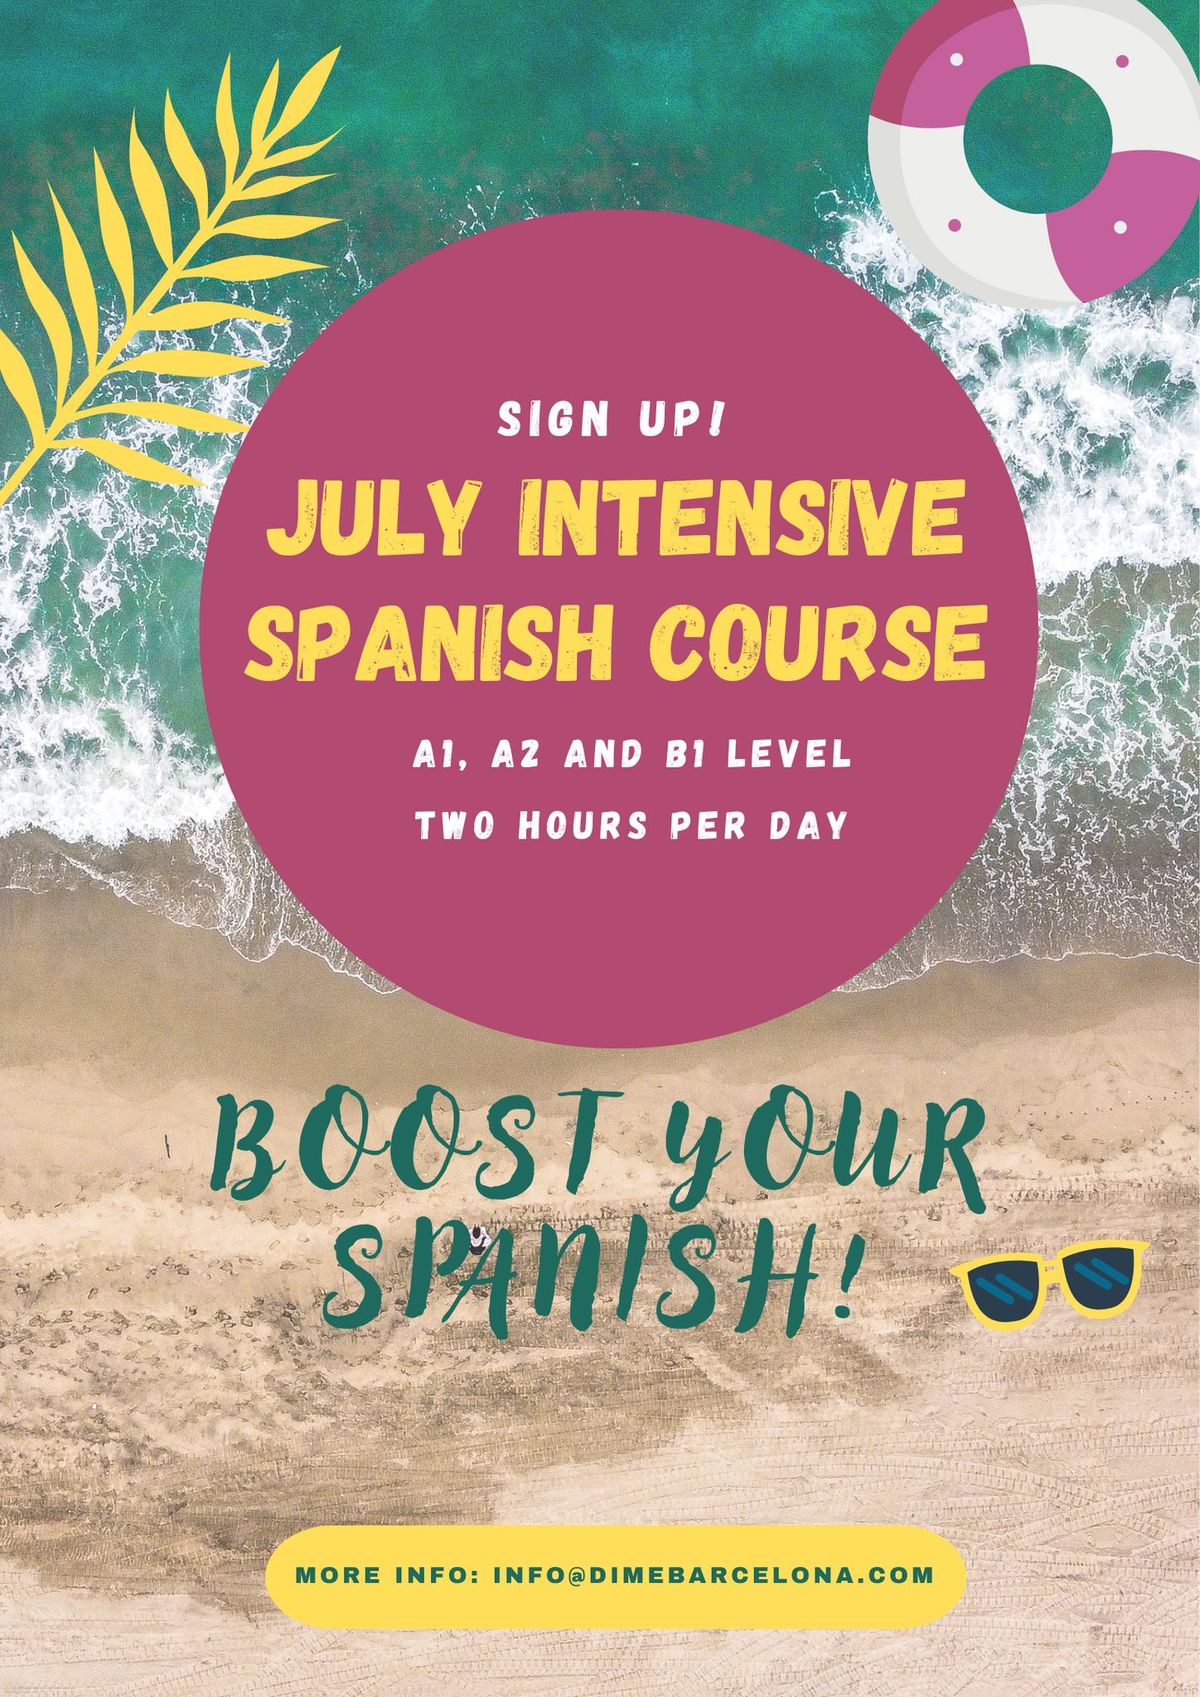 JULY INTENSIVE SPANISH COURSE